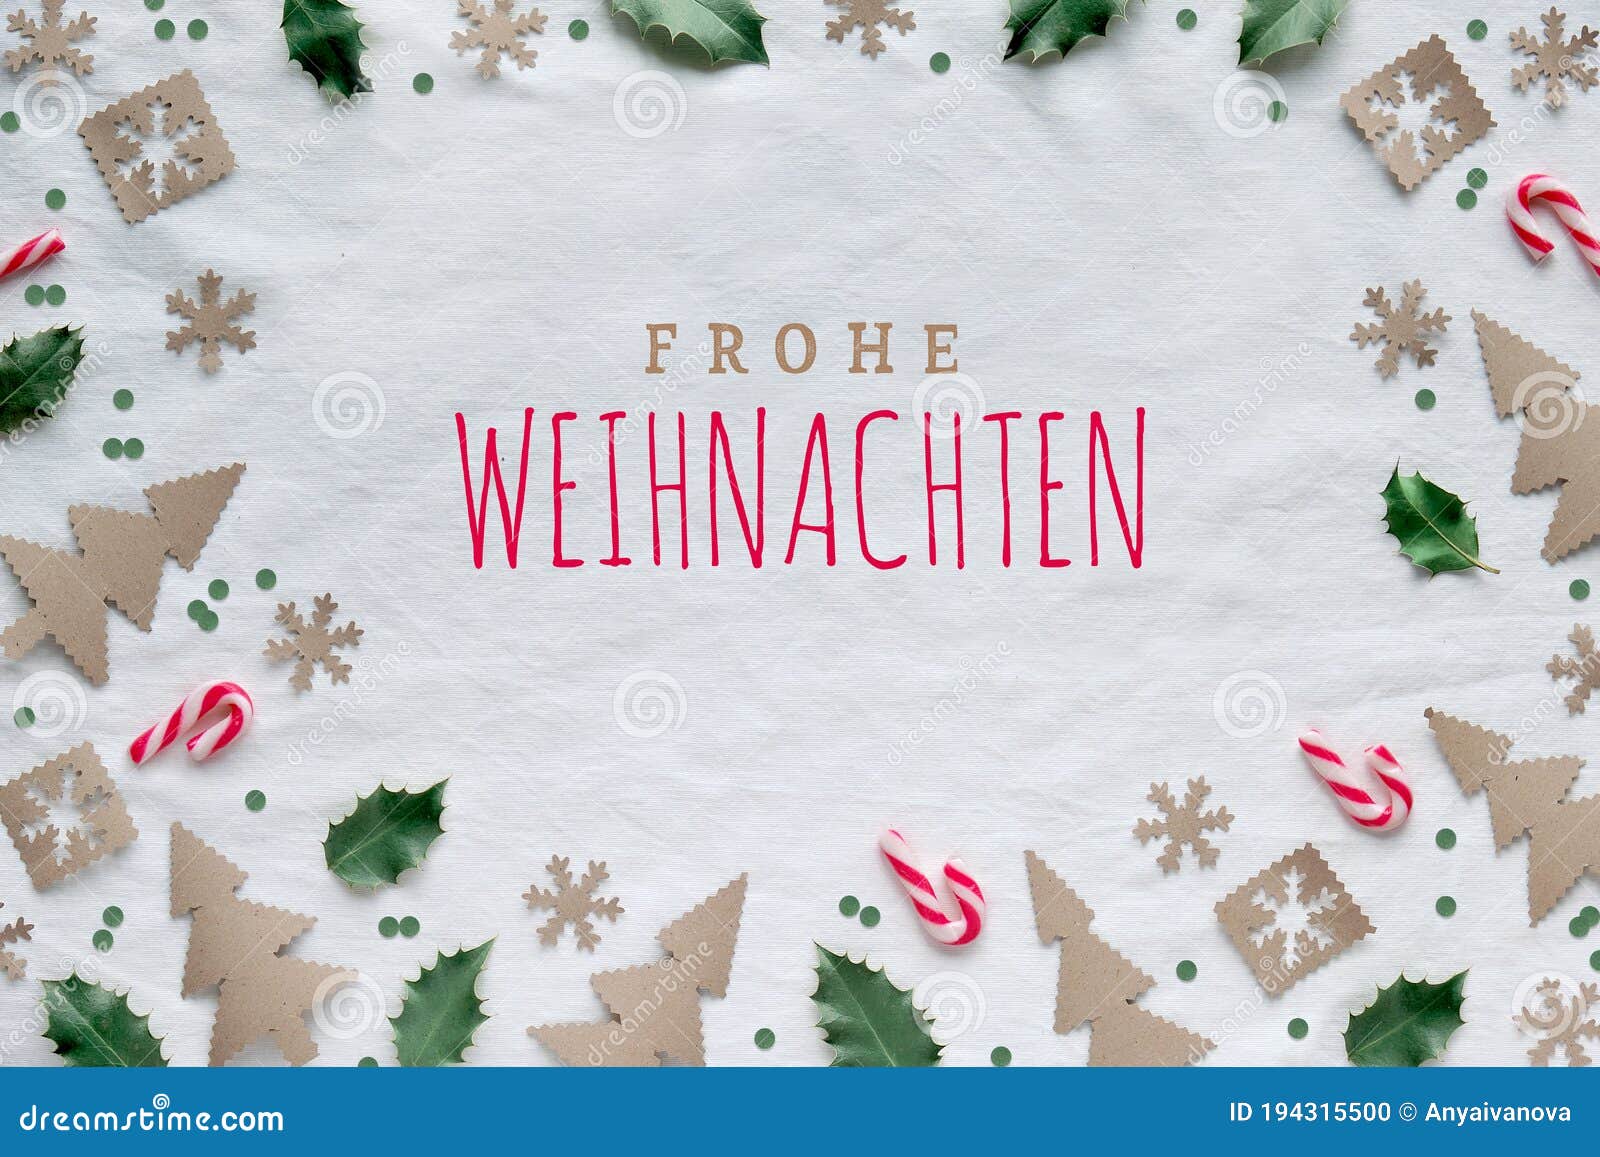 Text Frohe Weihnachten Means Merry Christmas in German. Eco ...